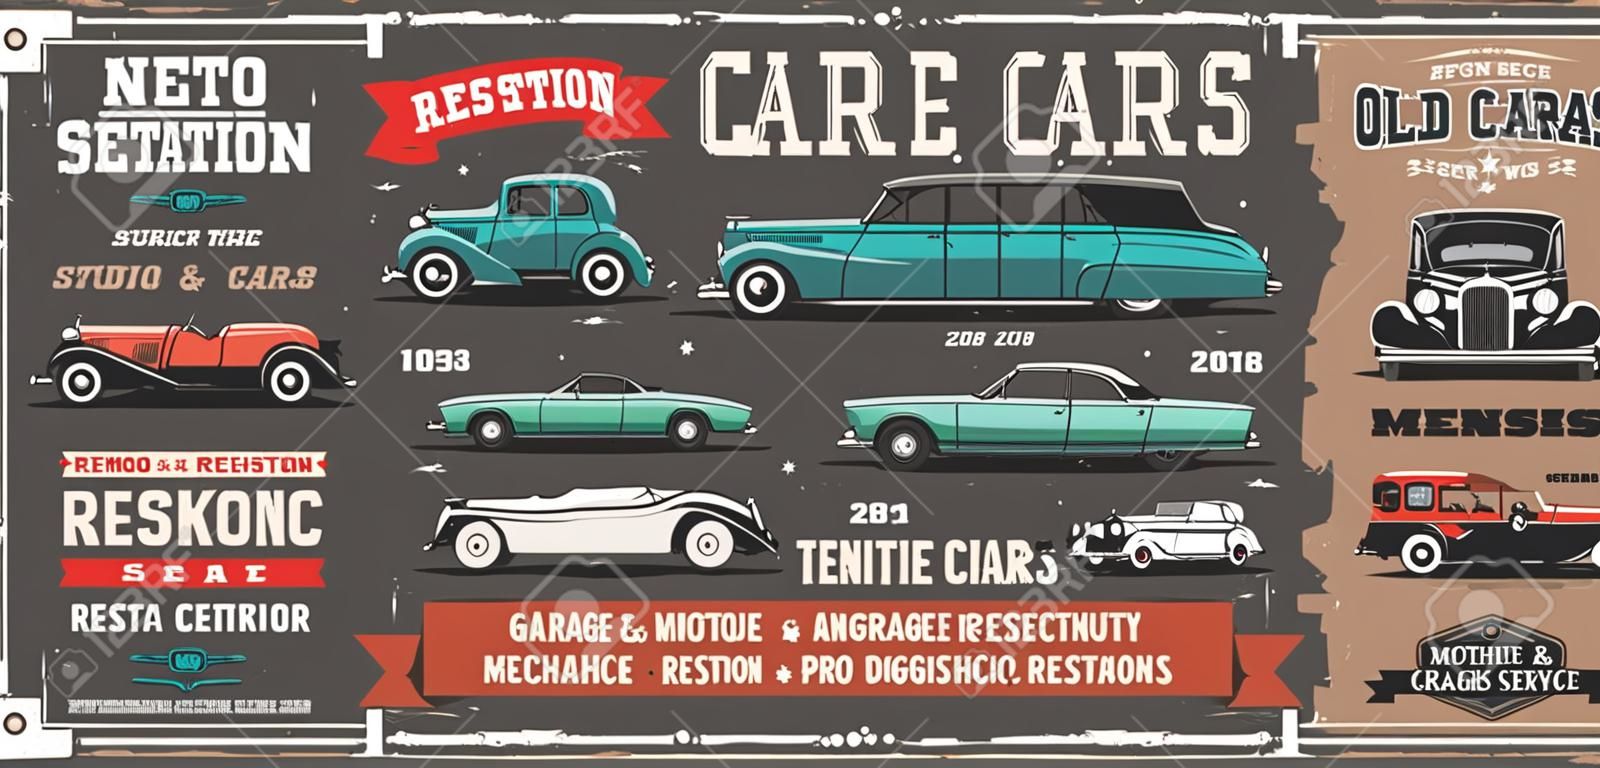 Retro cars, vintage old vehicle tuning and garage station service. Vector rarity and antique motor cars show, repair and diagnostic center, engine and chassis restoration mechanic garage